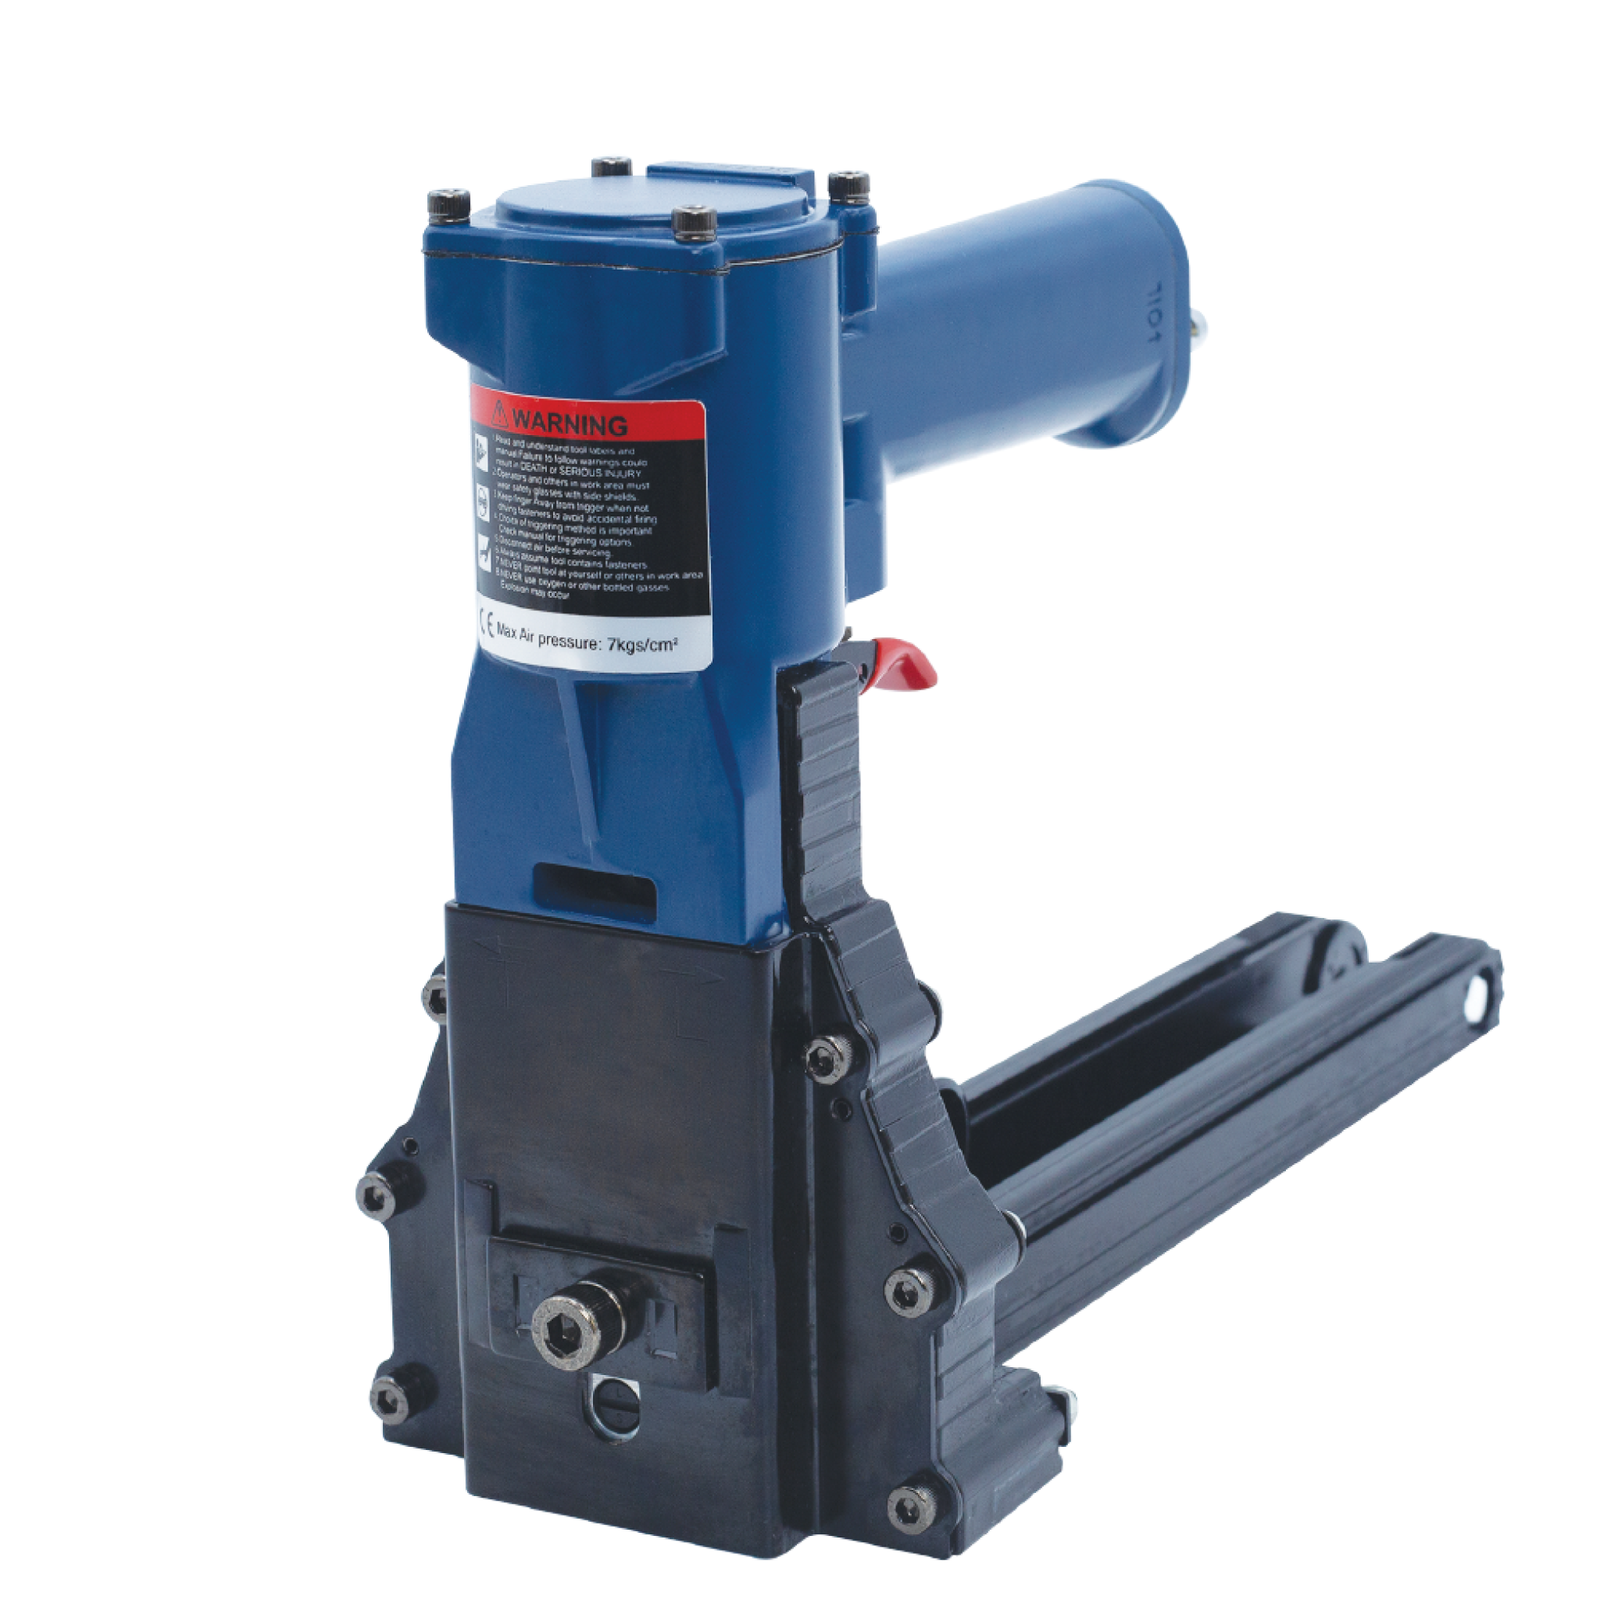 blue and black pneumatic staple gun for carton boxes. Featuring a red/black warning label